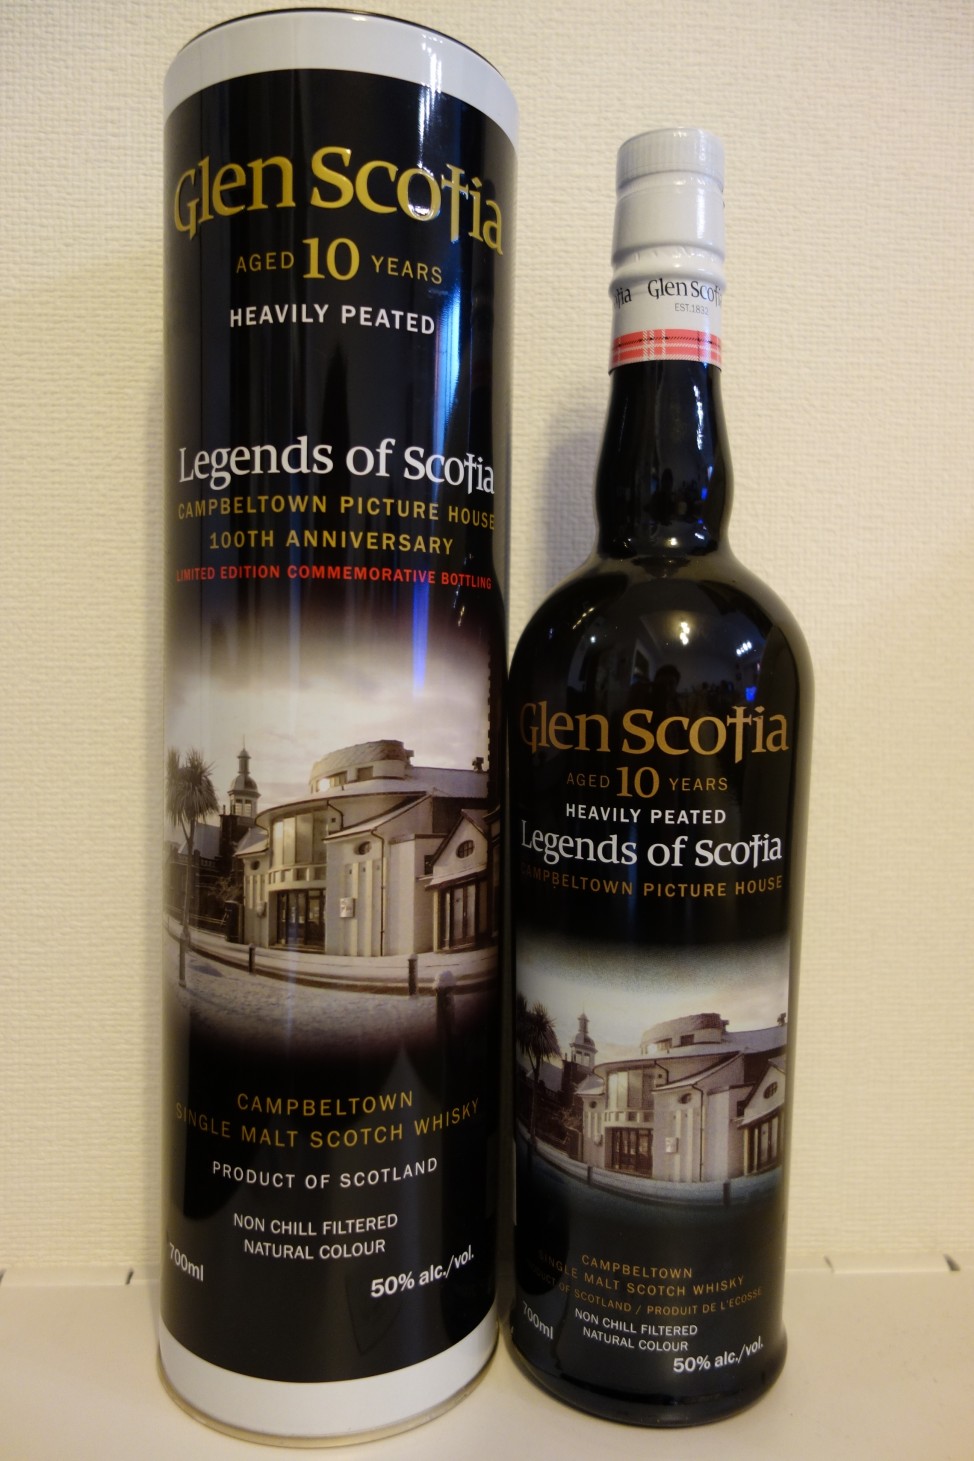 GLENSCOTIA 10yo OB "Legends of Scotia" Campbeltown Picture House 100th Anniversary